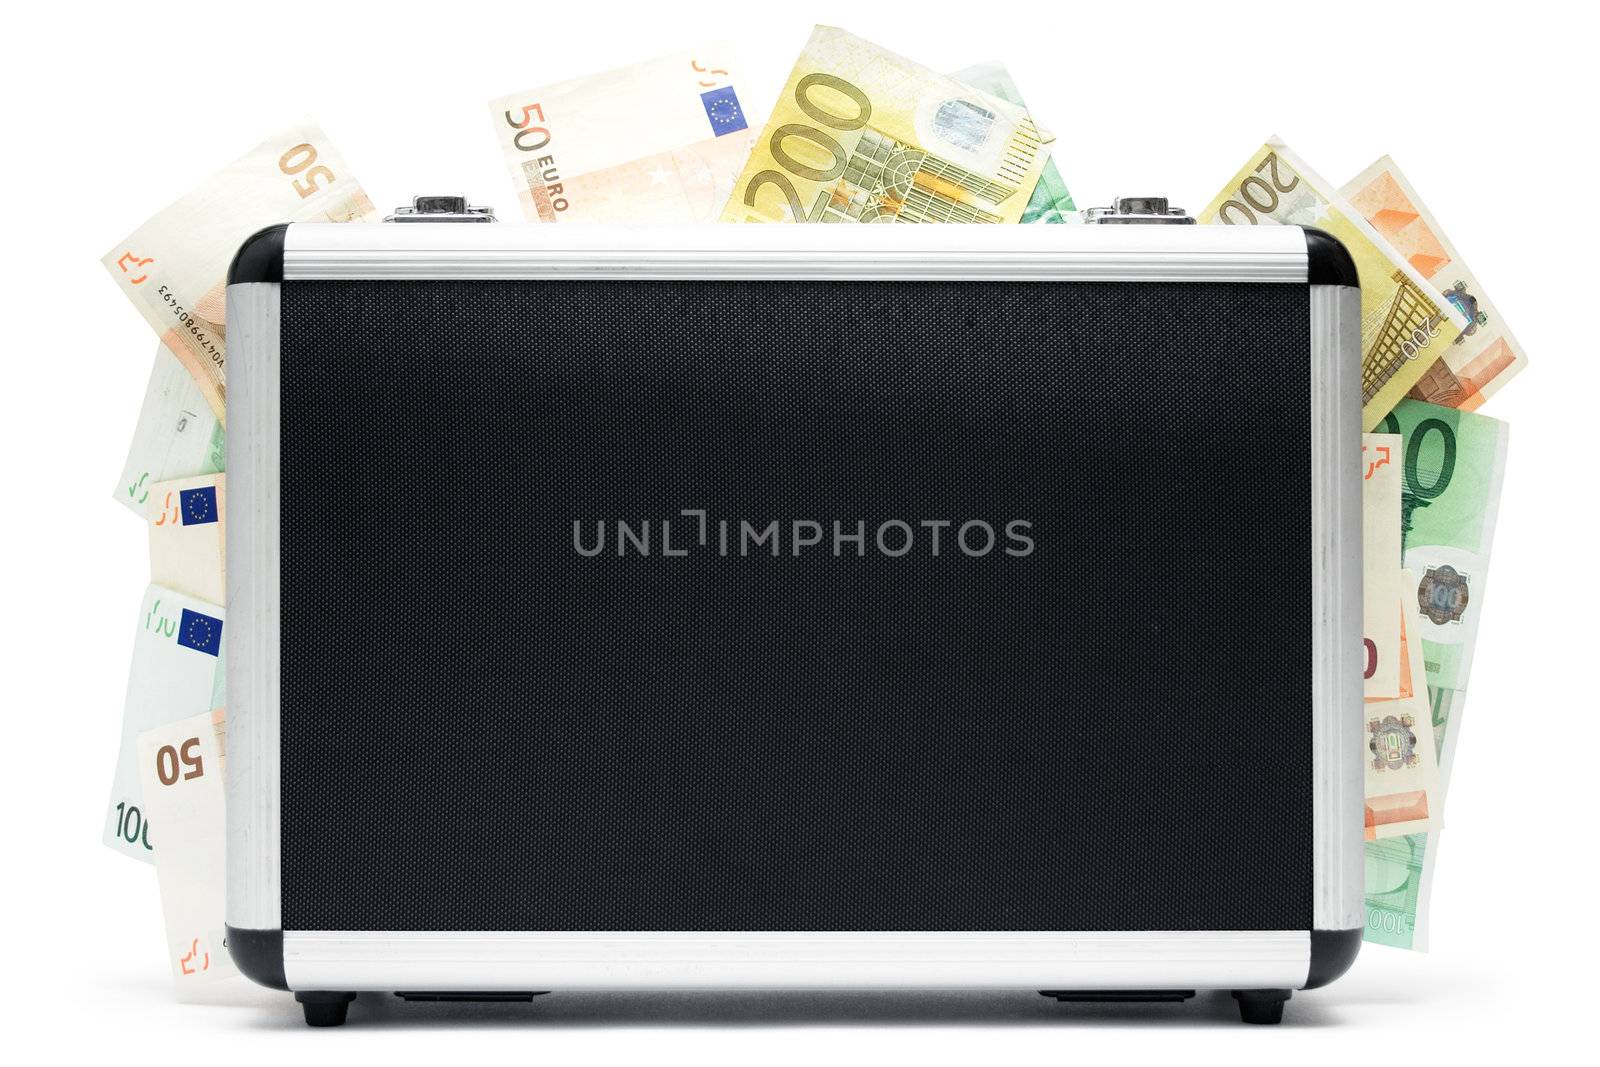 Standing money case full of banknotes. Isolated on a white background.